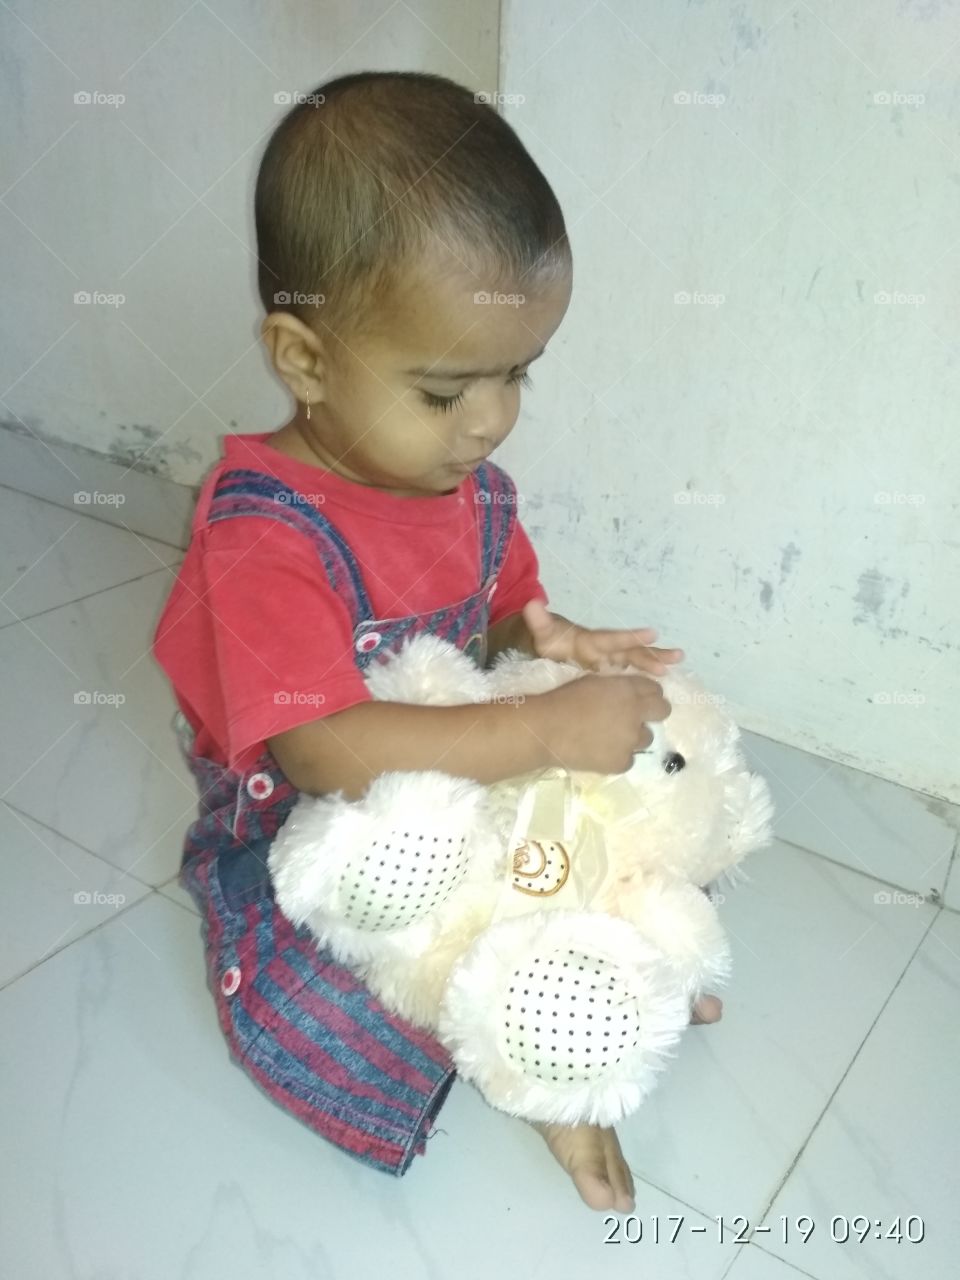 playing with teddy bear